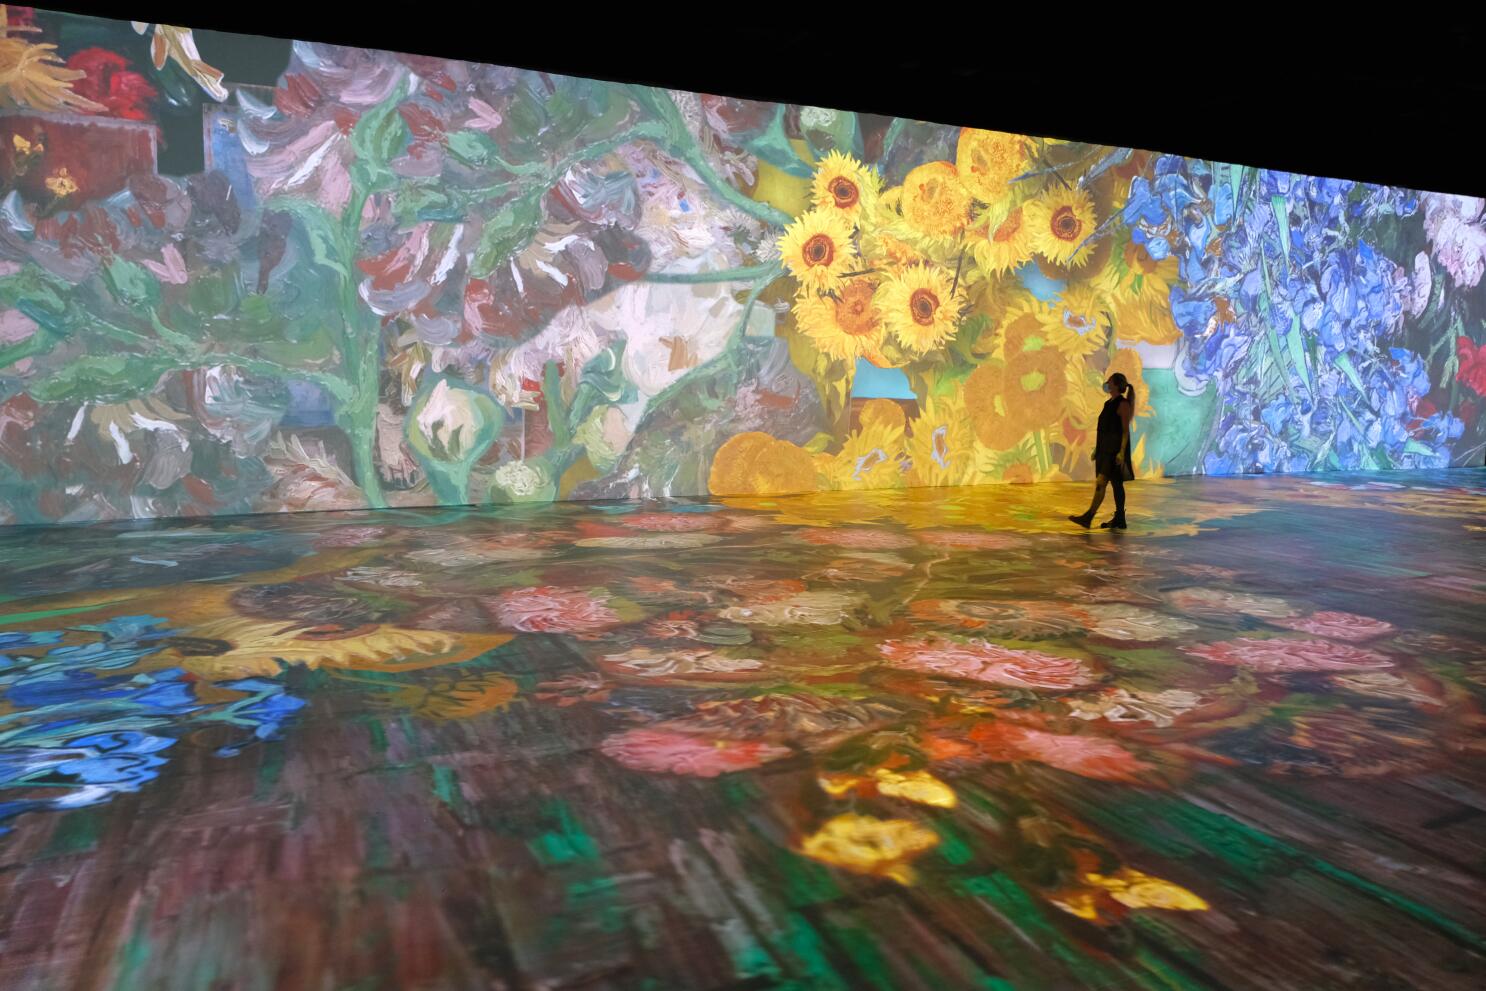 A Conversation with the Composer Behind 'Immersive Van Gogh' - San